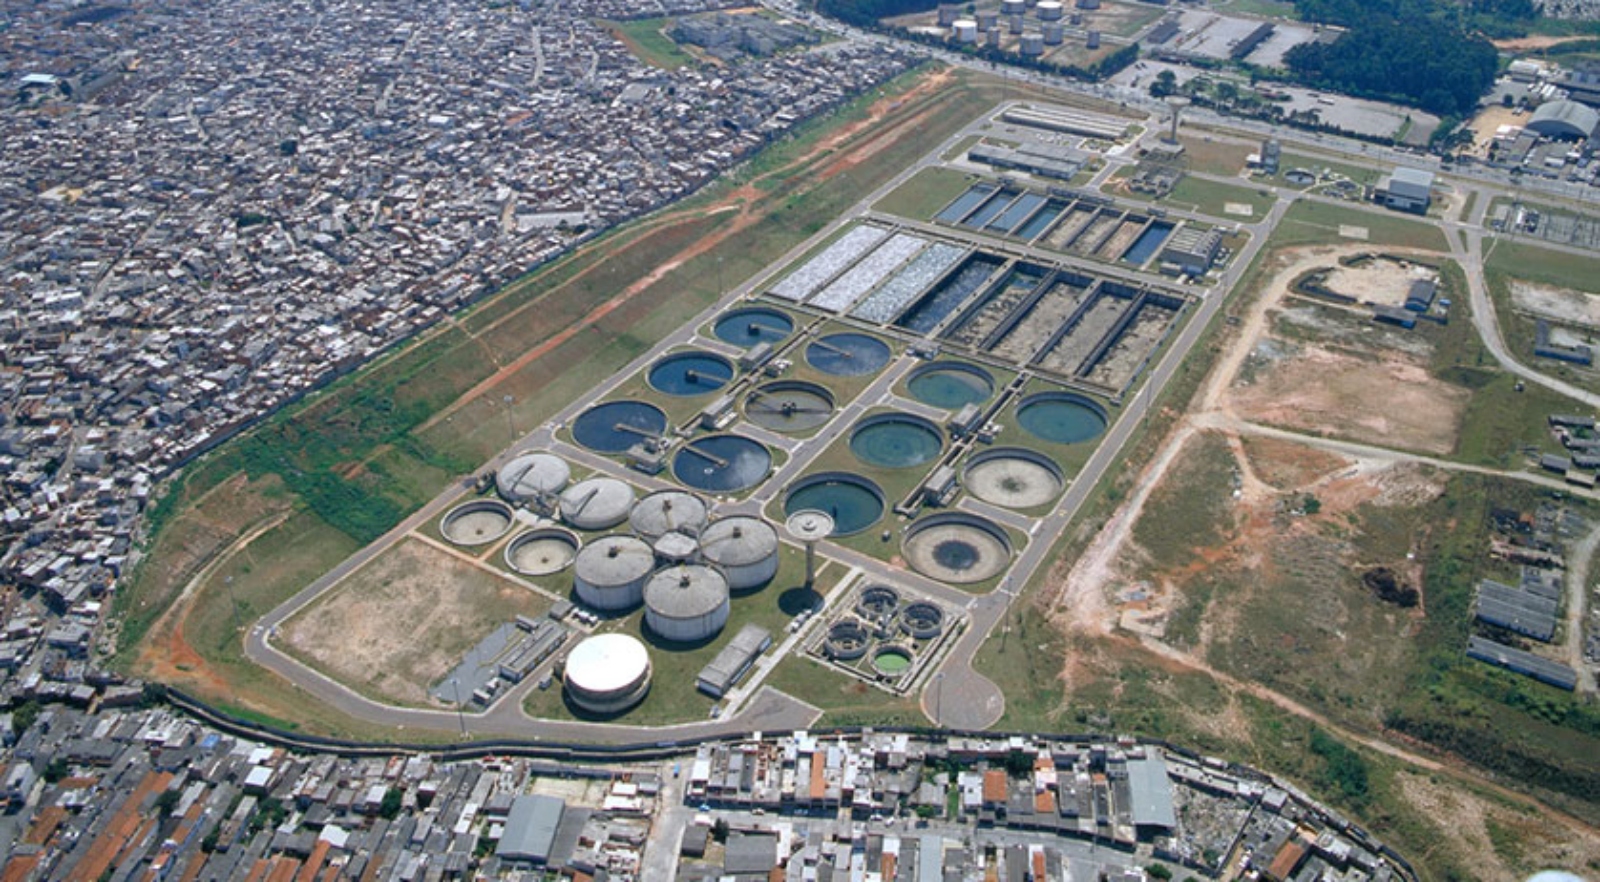 Lodologic will bring Israeli technology facility to this this Brazilian plant treating over 310 tons of sludge from 4 million residents, every day. Photo courtesy of Lodologic